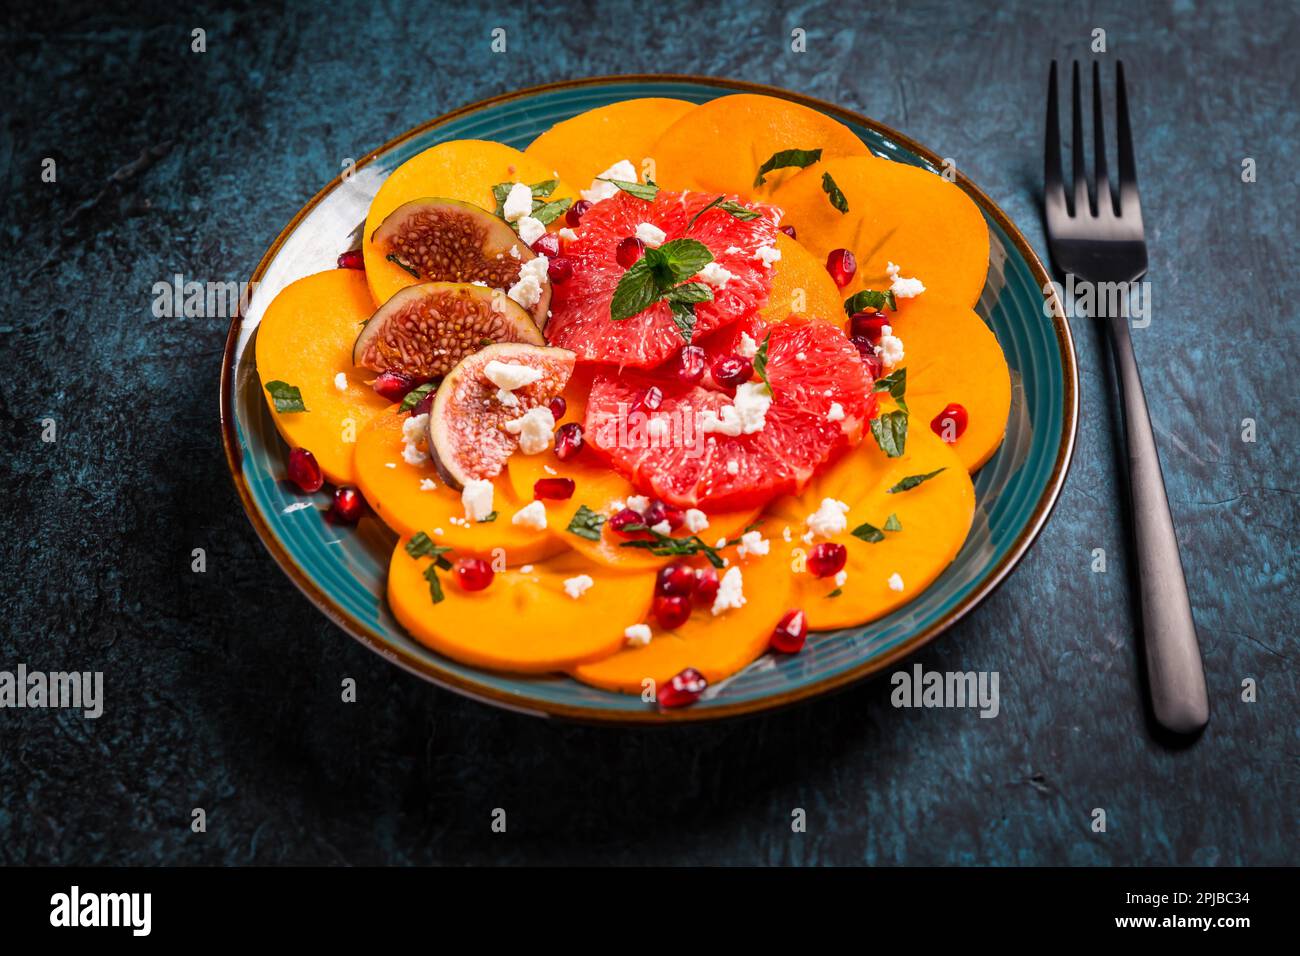 Healthy winter salad - Persimmon carpaccio salad with pomegranate, feta cheese, pink grapefruit and figs Stock Photo